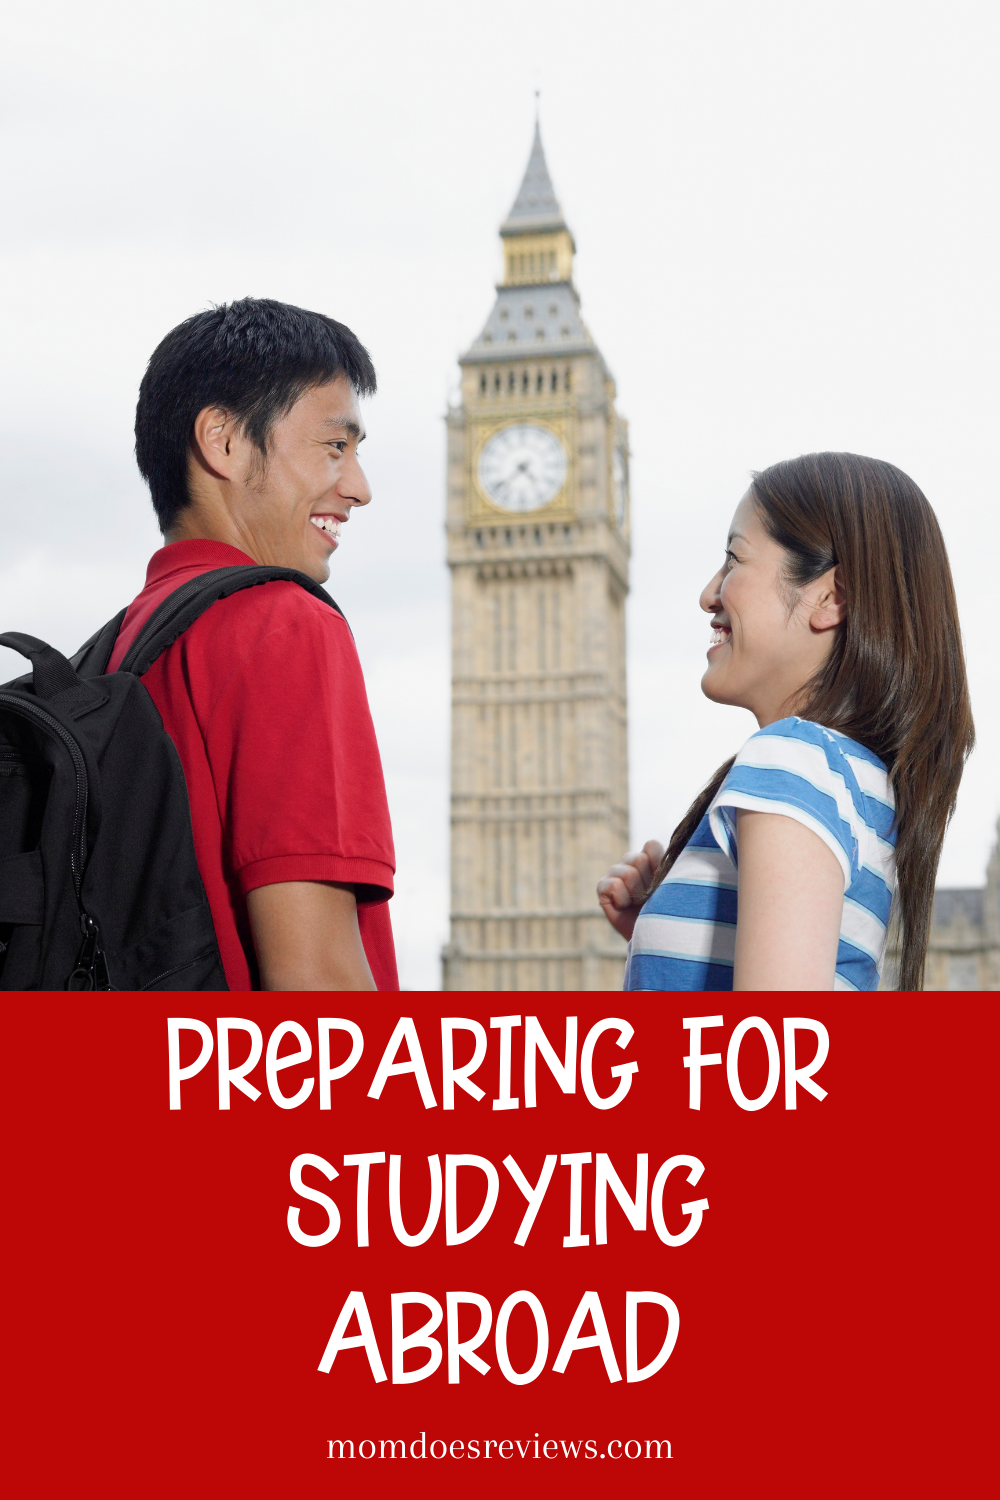 How Students Can Prepare for Studying Abroad